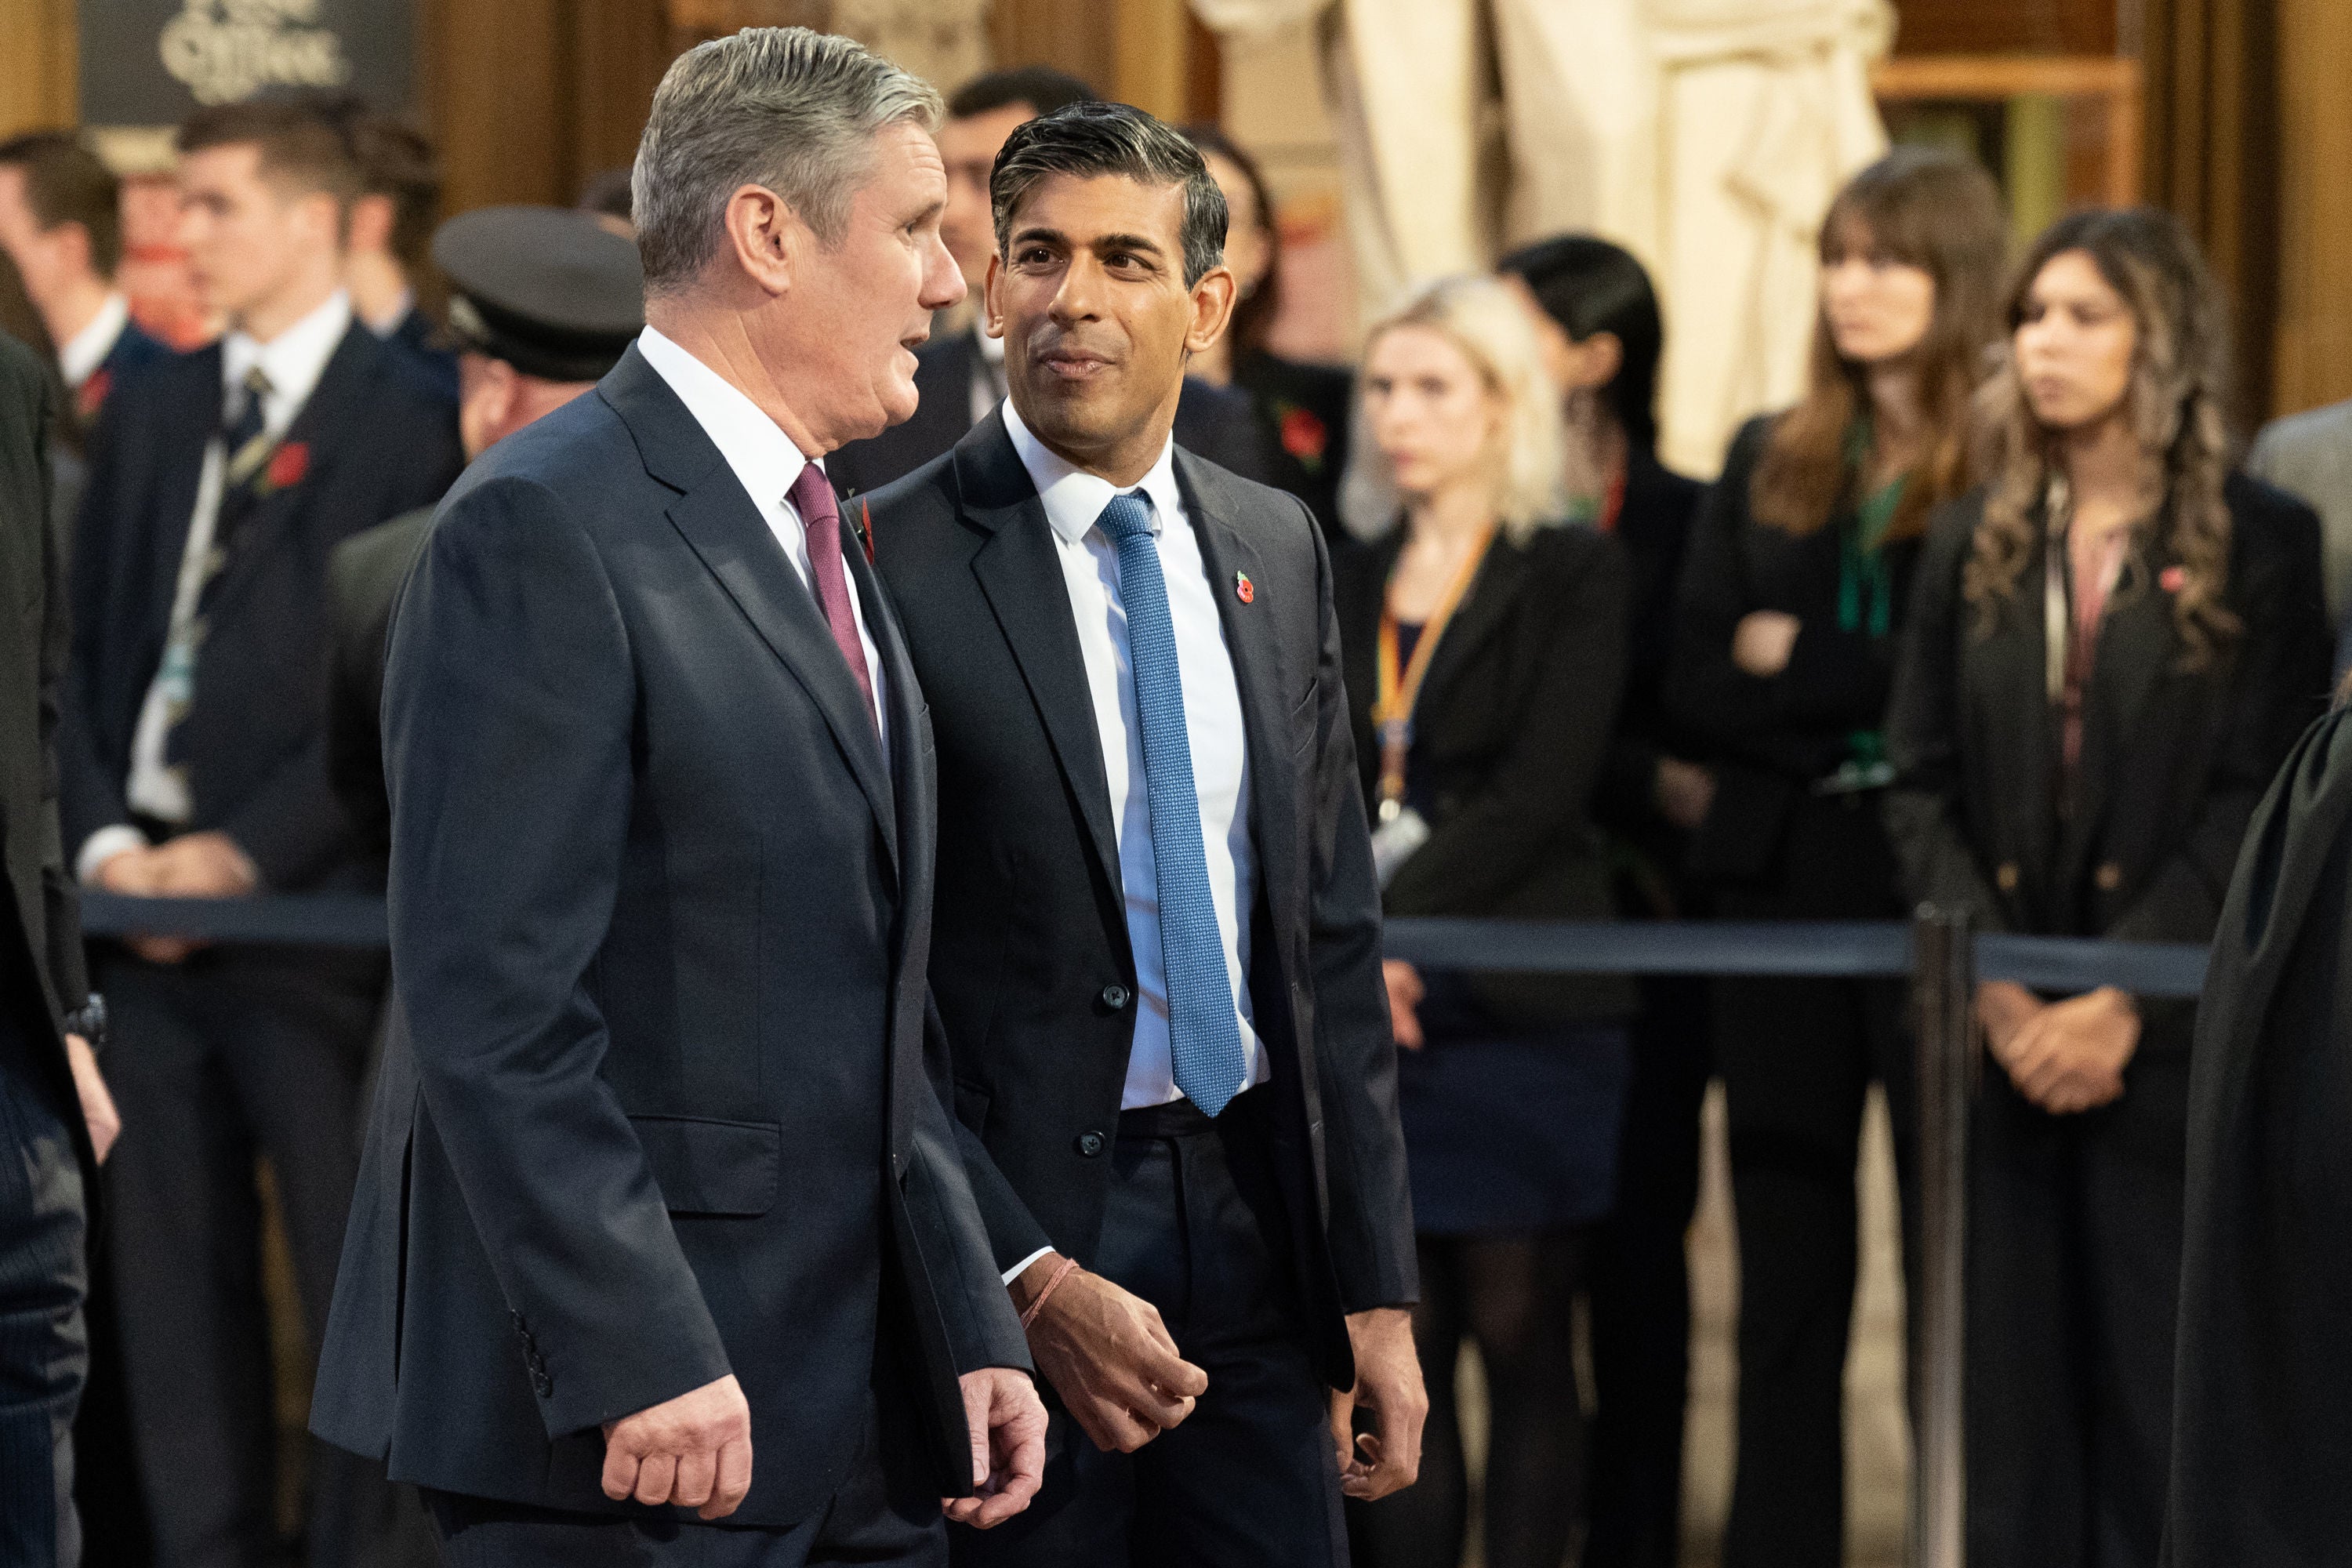 Keir Starmer with the prime minister, Rishi Sunak, ahead of the King’s Speech